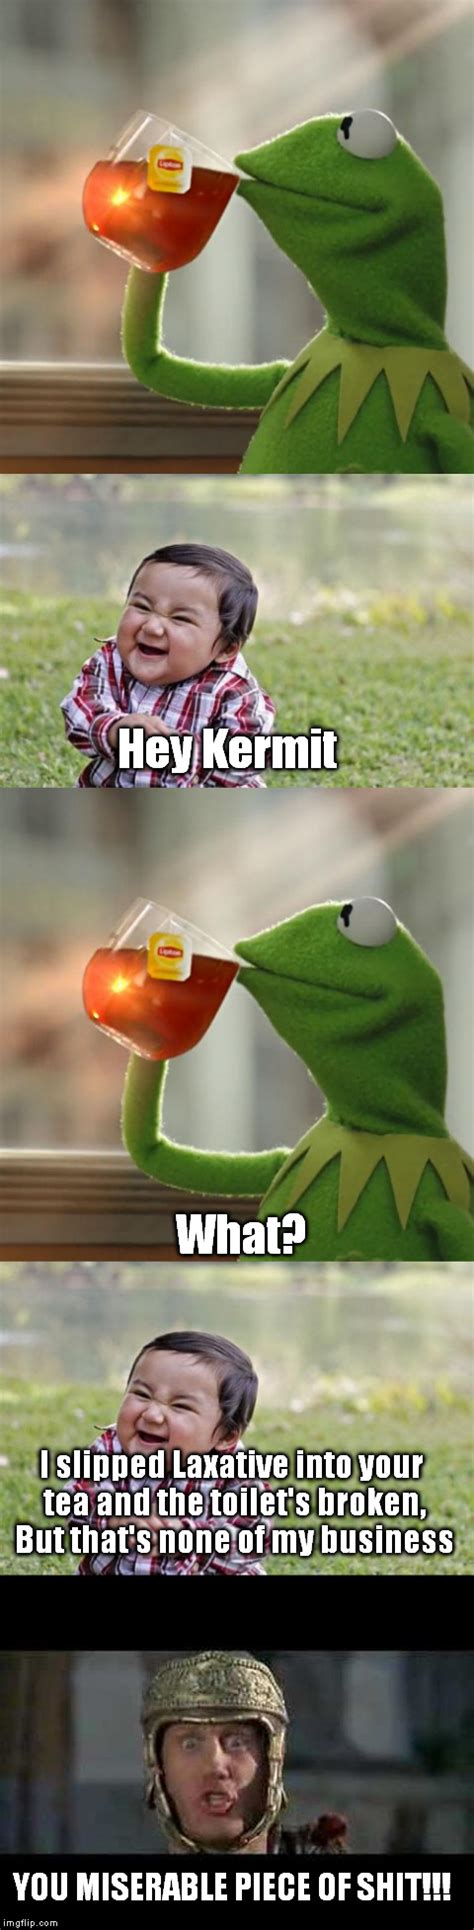 Kermit Vs The Evil Toddler And A Miserable Piece Of Shit Too Imgflip